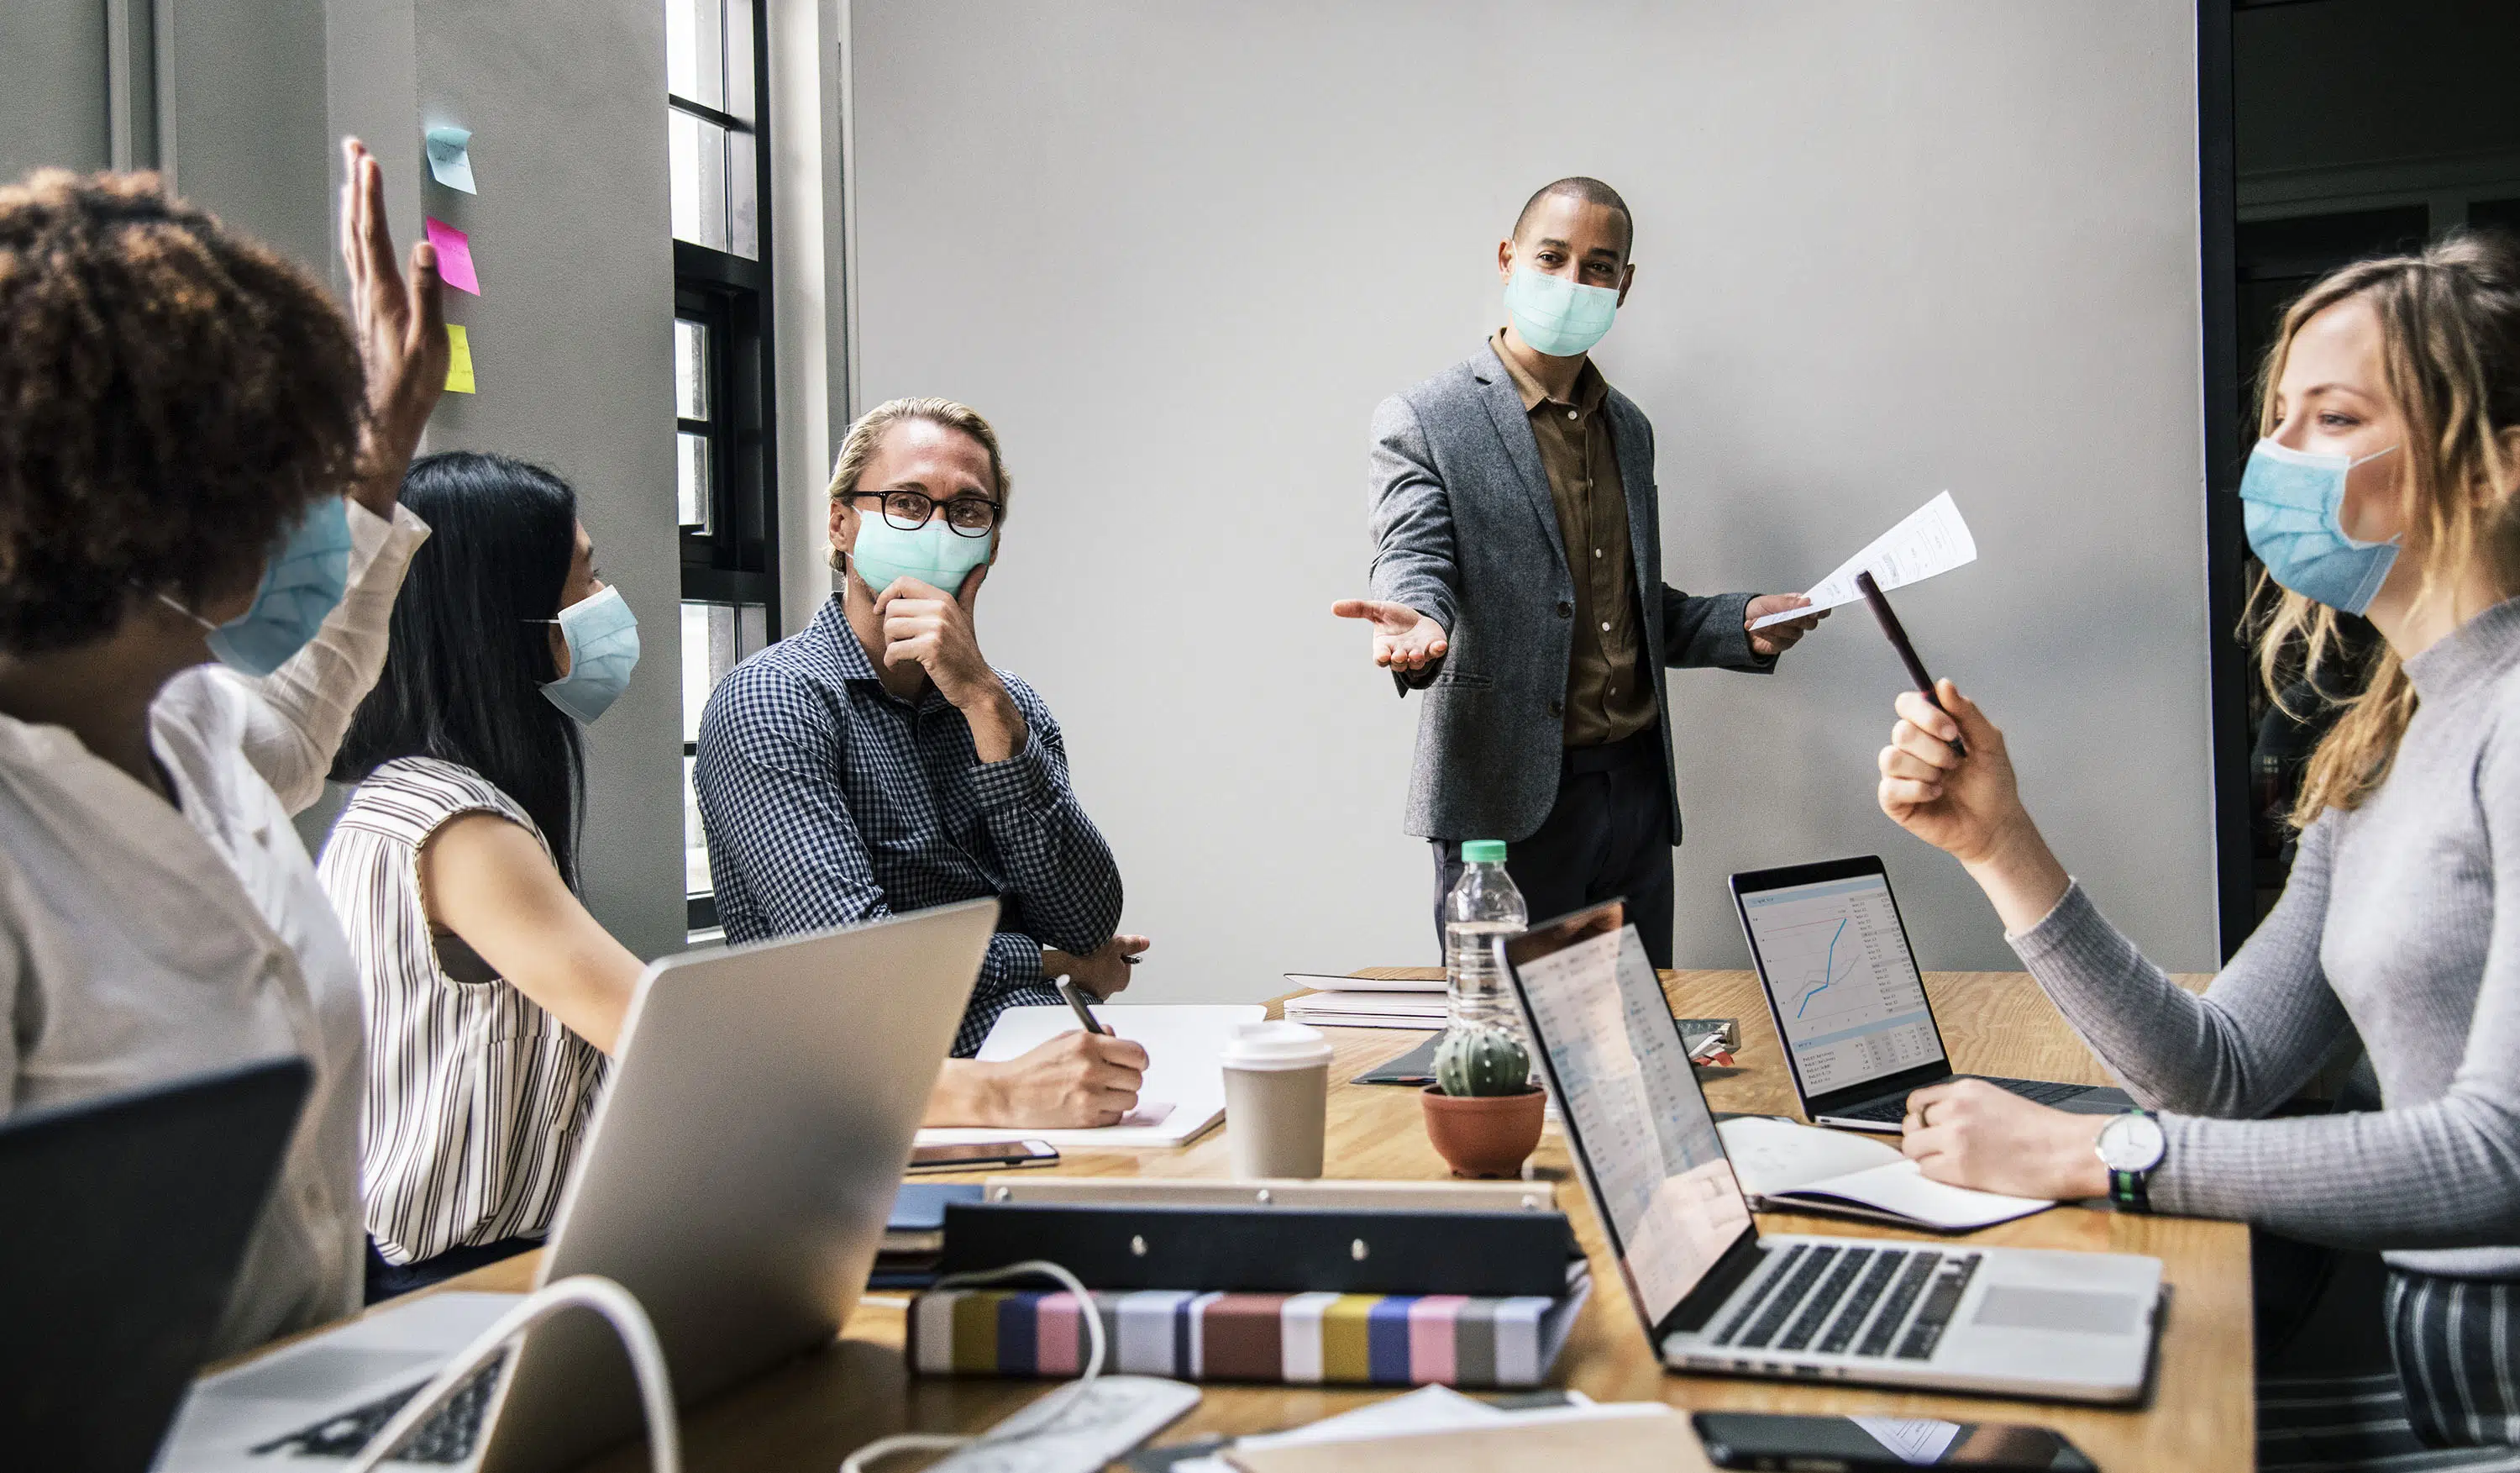 business people wearing masks in coronavirus meeting the new normal scaled